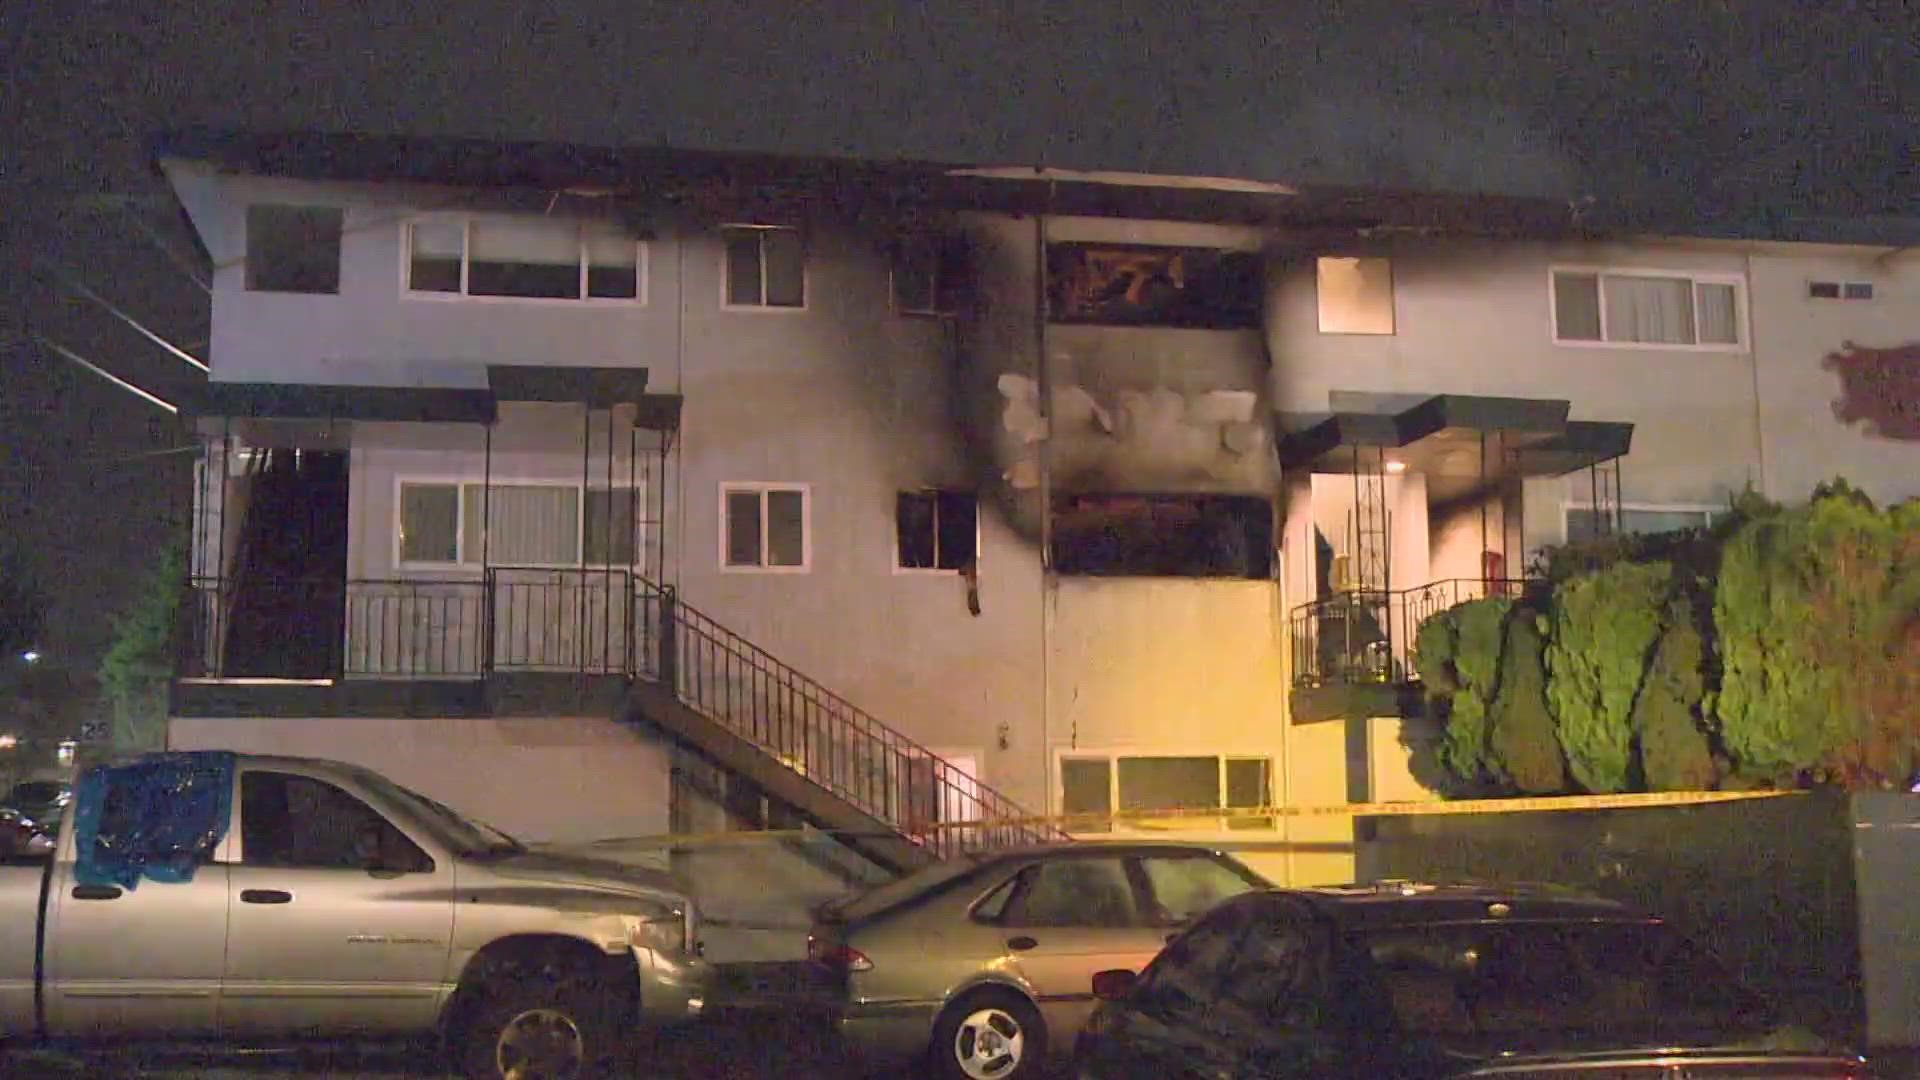 A fire broke out overnight at the Marie Anne Terrace apartments in Everett, leaving several people displaced